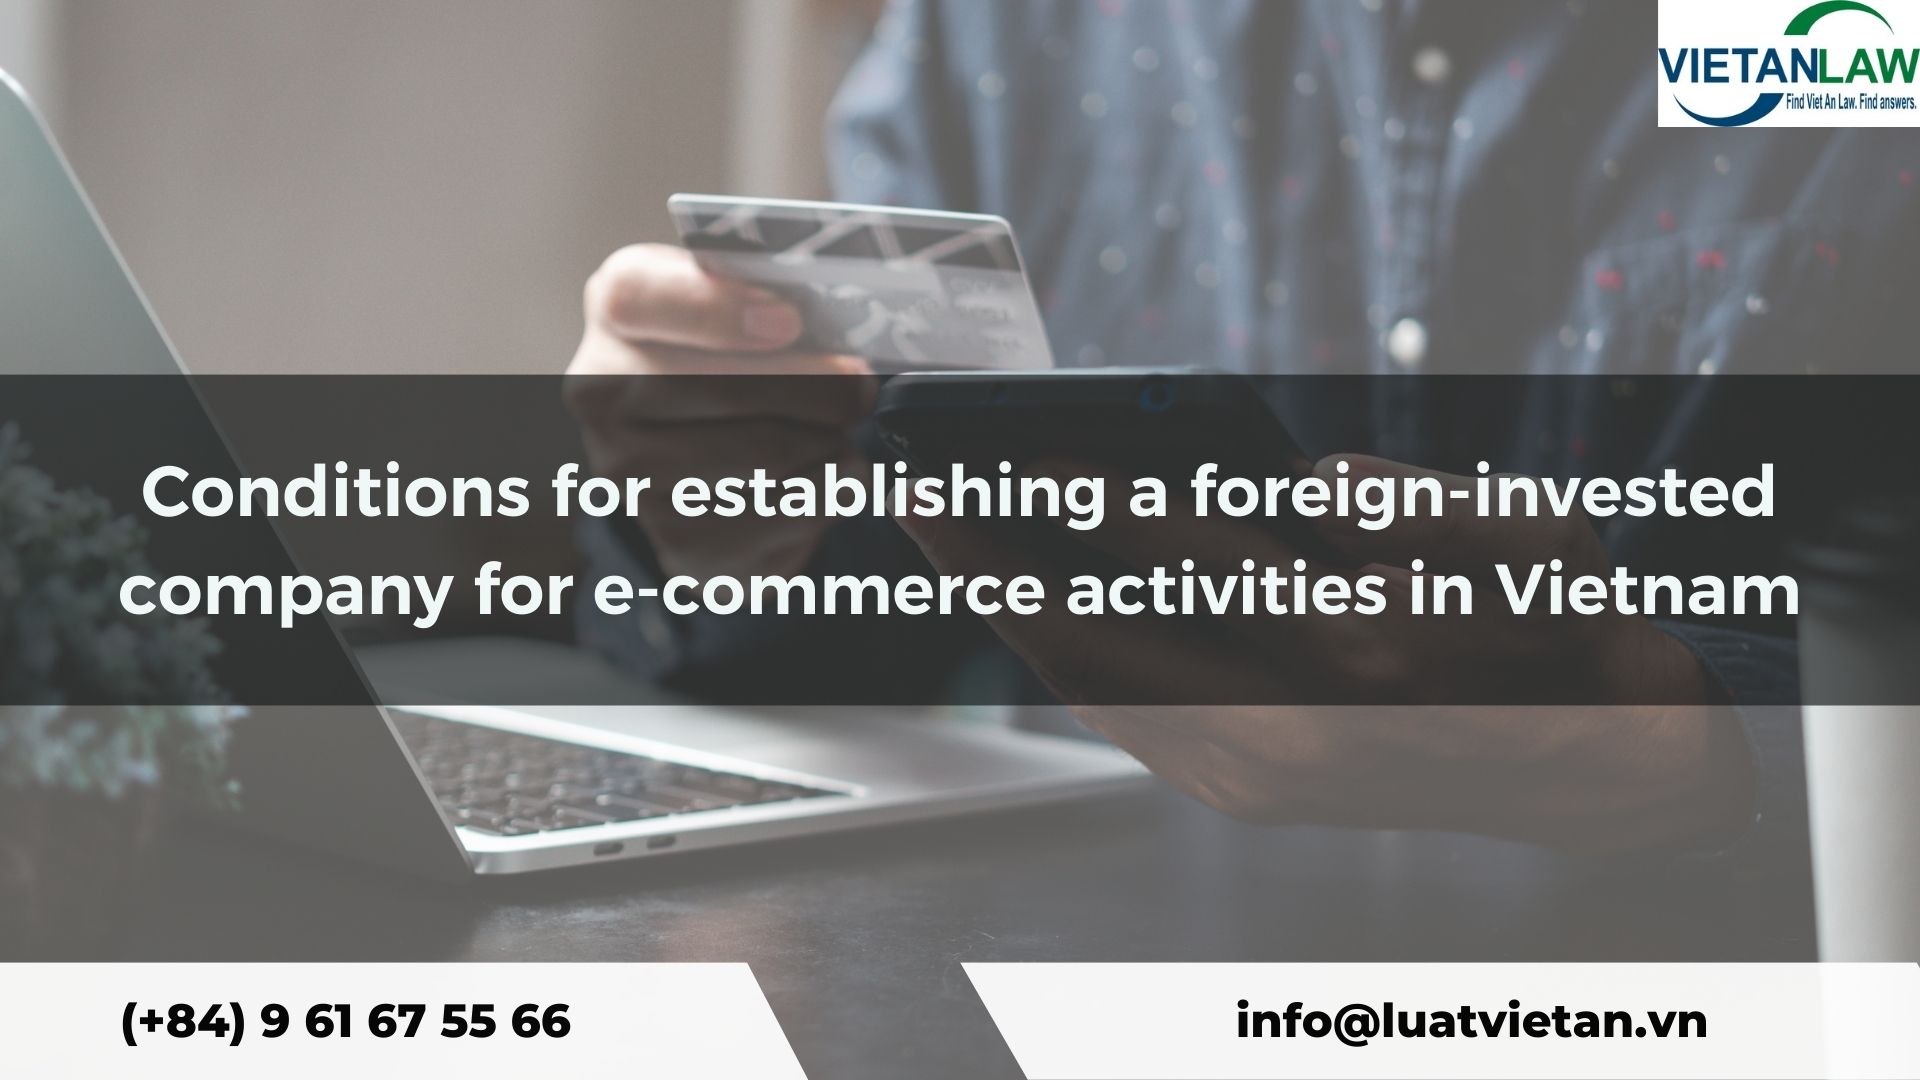 Conditions for establishing a foreign-invested company for e-commerce activities in Vietnam